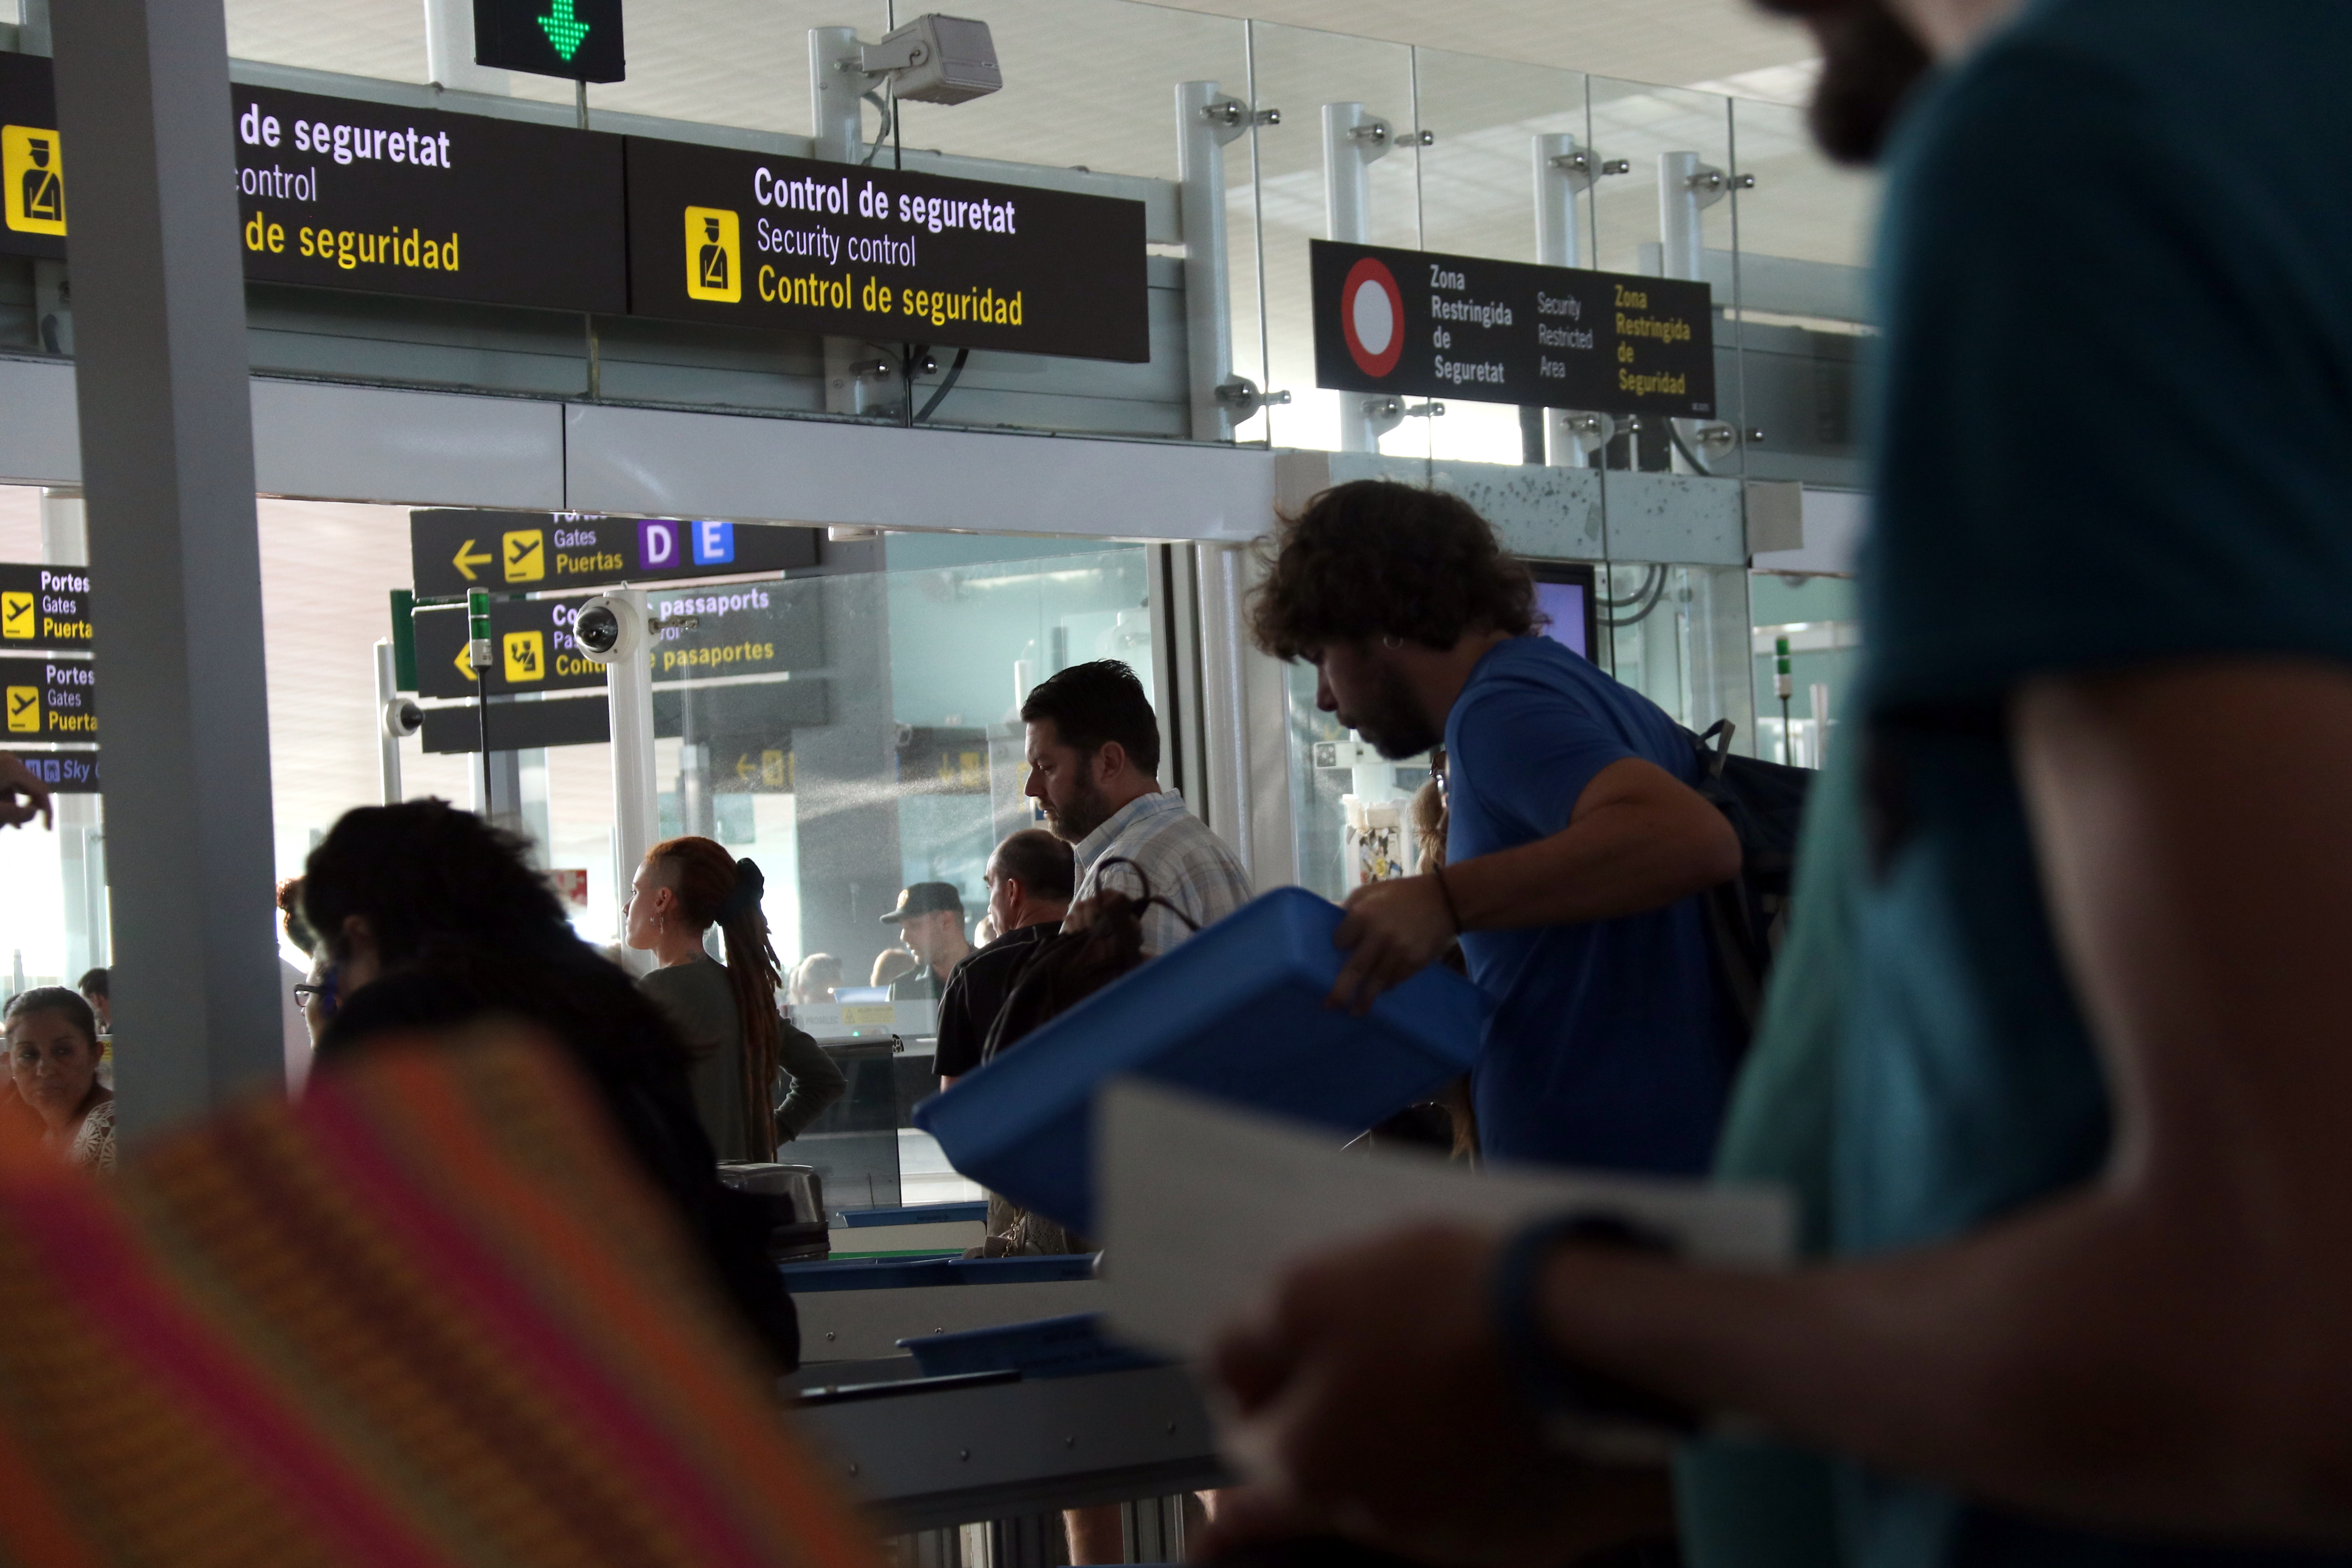 Passengers crossing security control at Barcelona airport (by ACN)